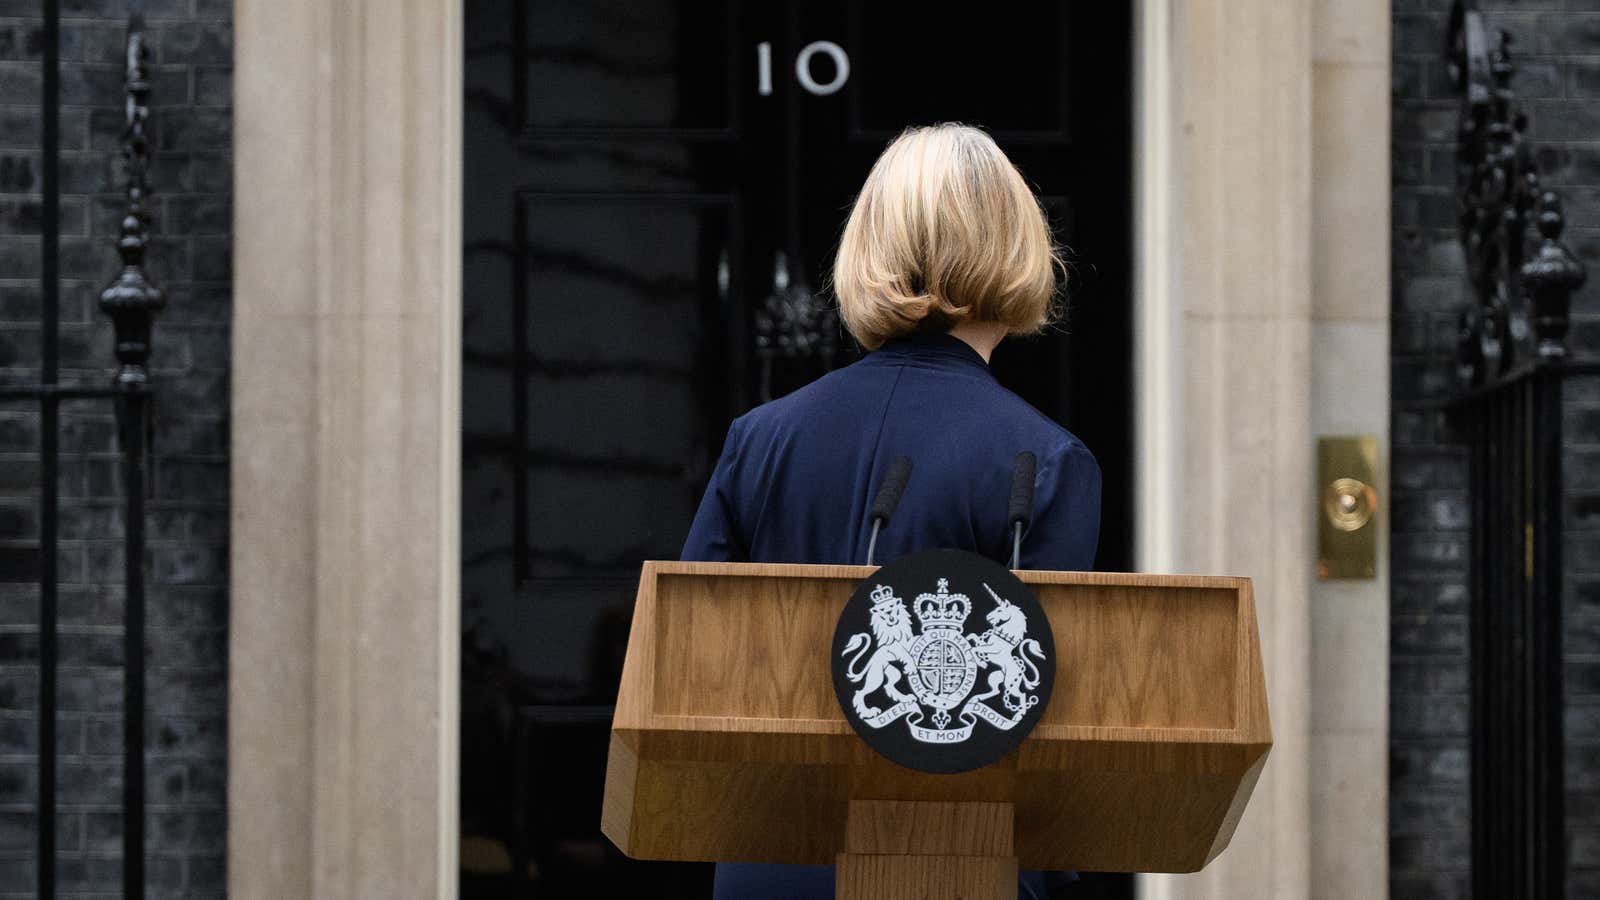 Liz Truss has resigned after 44 days in power that plunged the UK into chaos